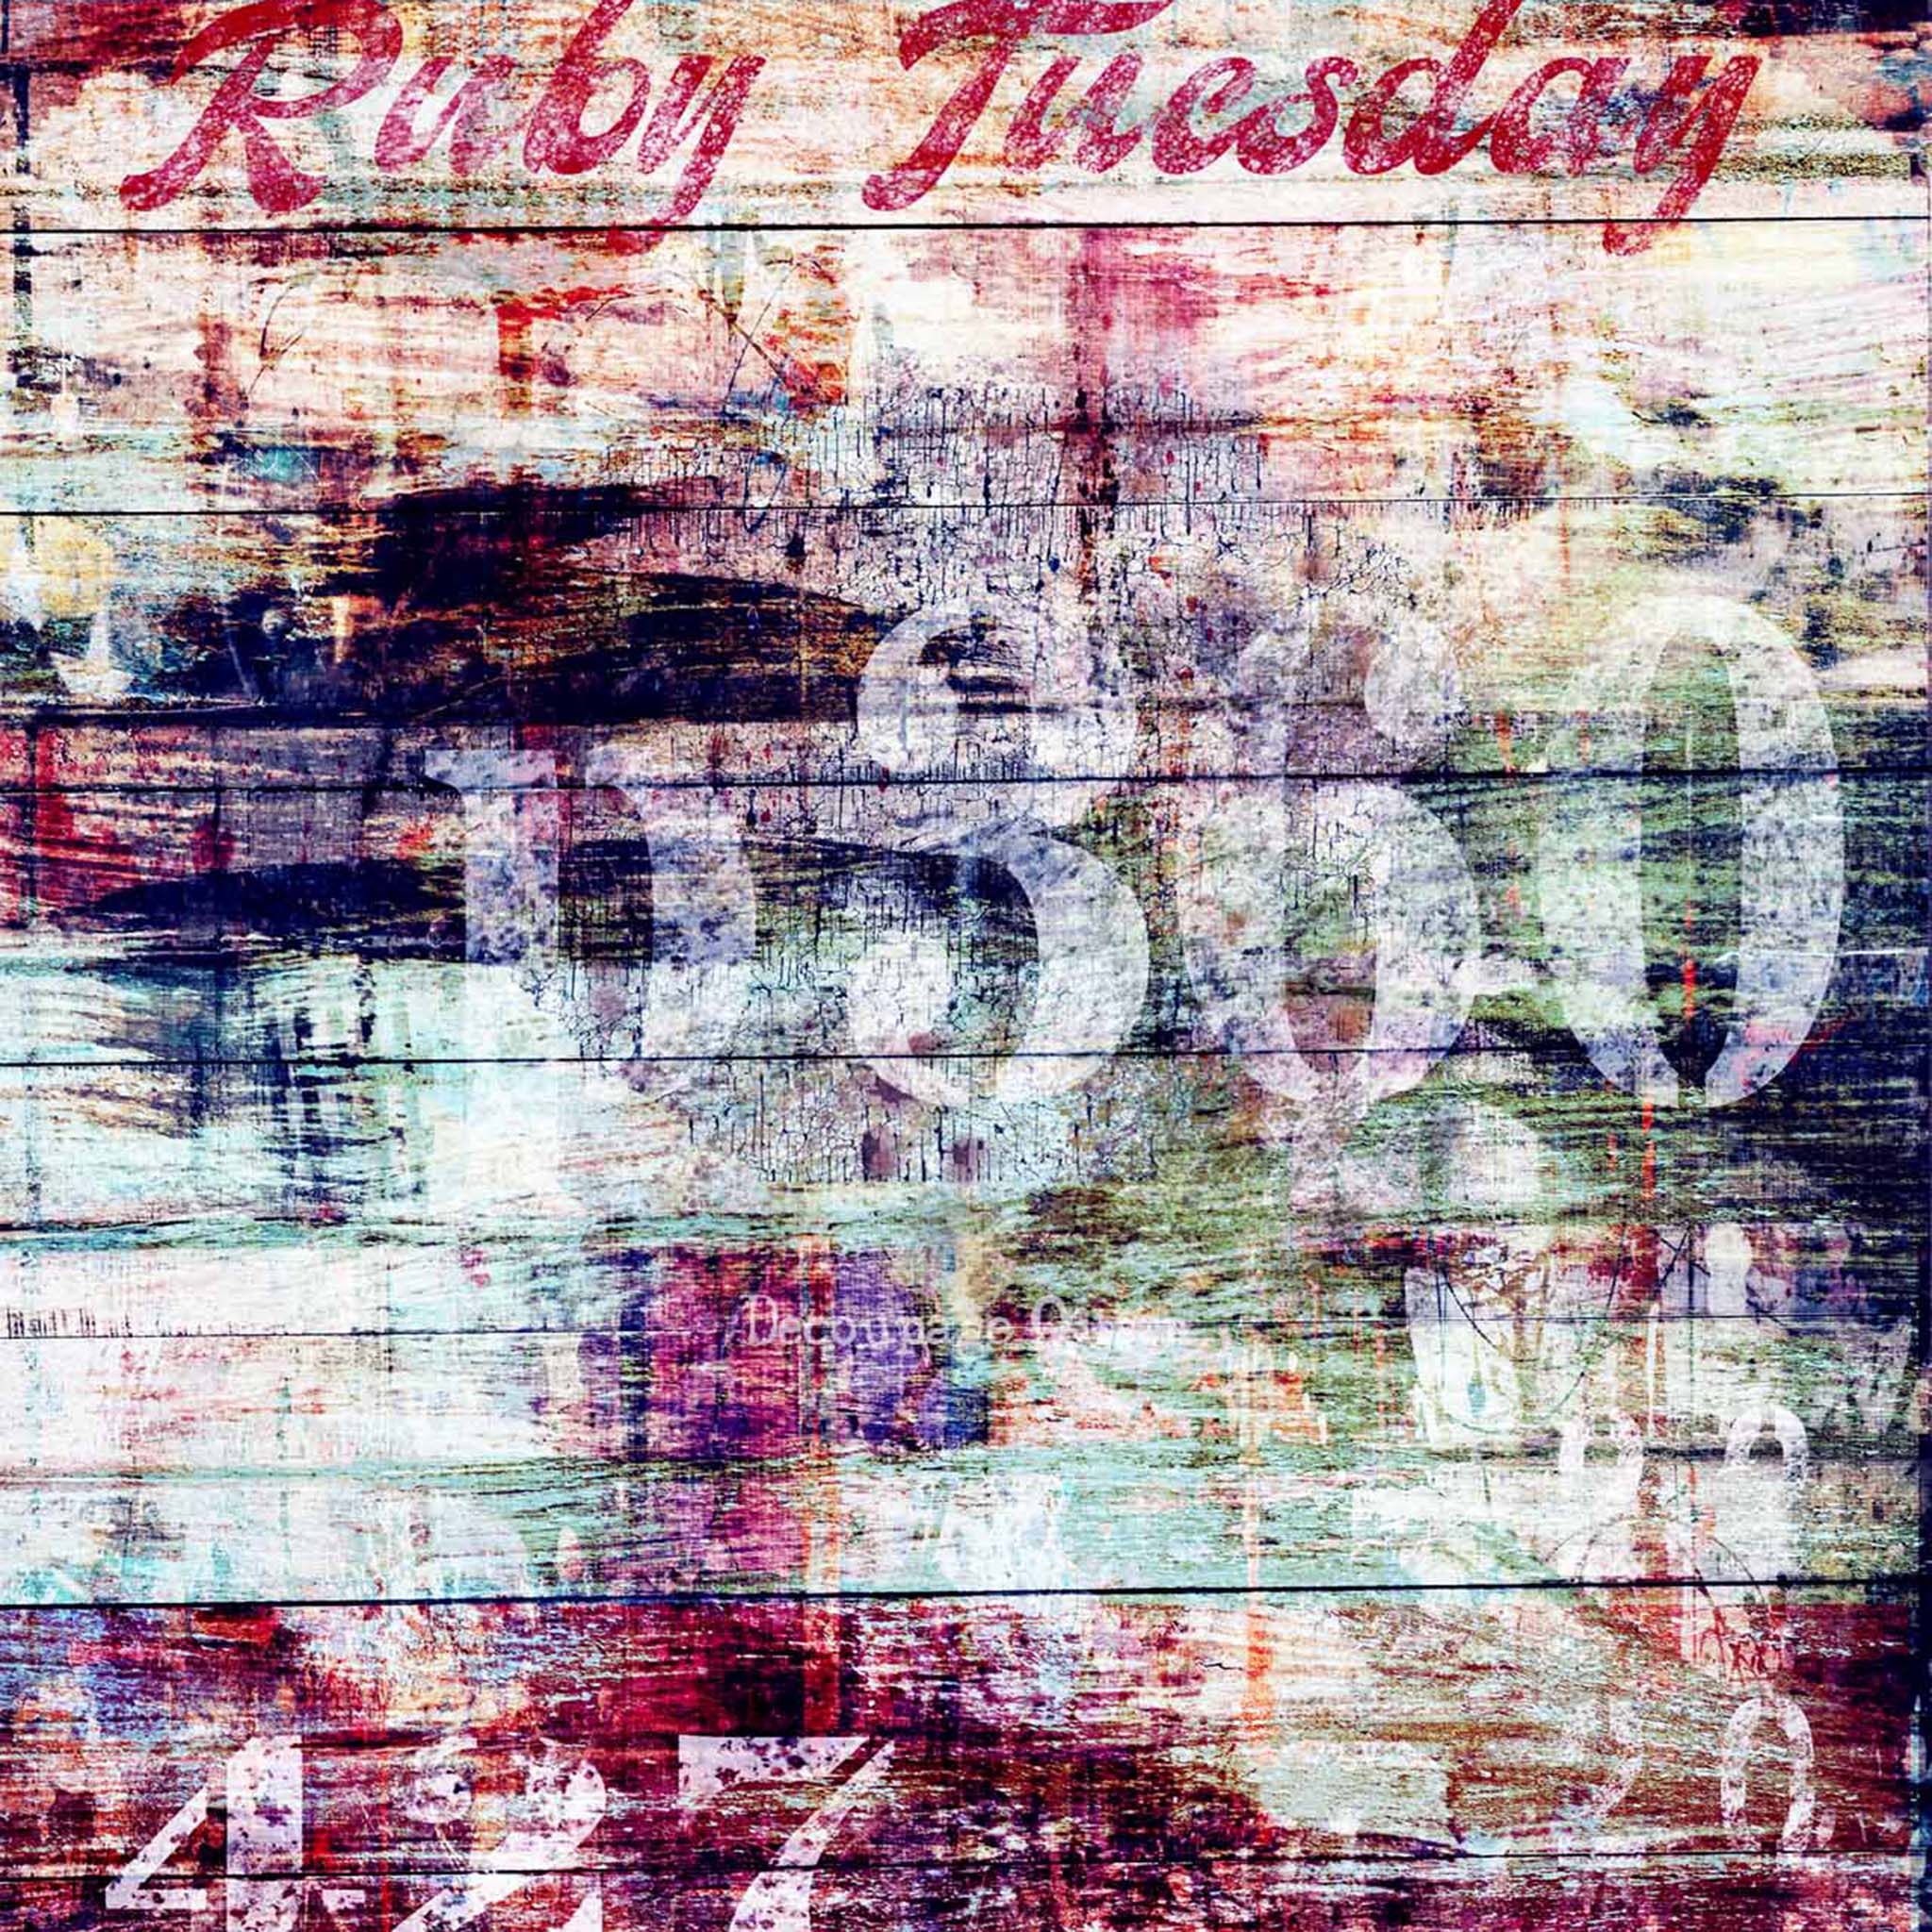 Close-up of a rice paper that features a unique collection of painted weathered wooden planks with the words "Ruby Tuesday" and block numbers stenciled on them.